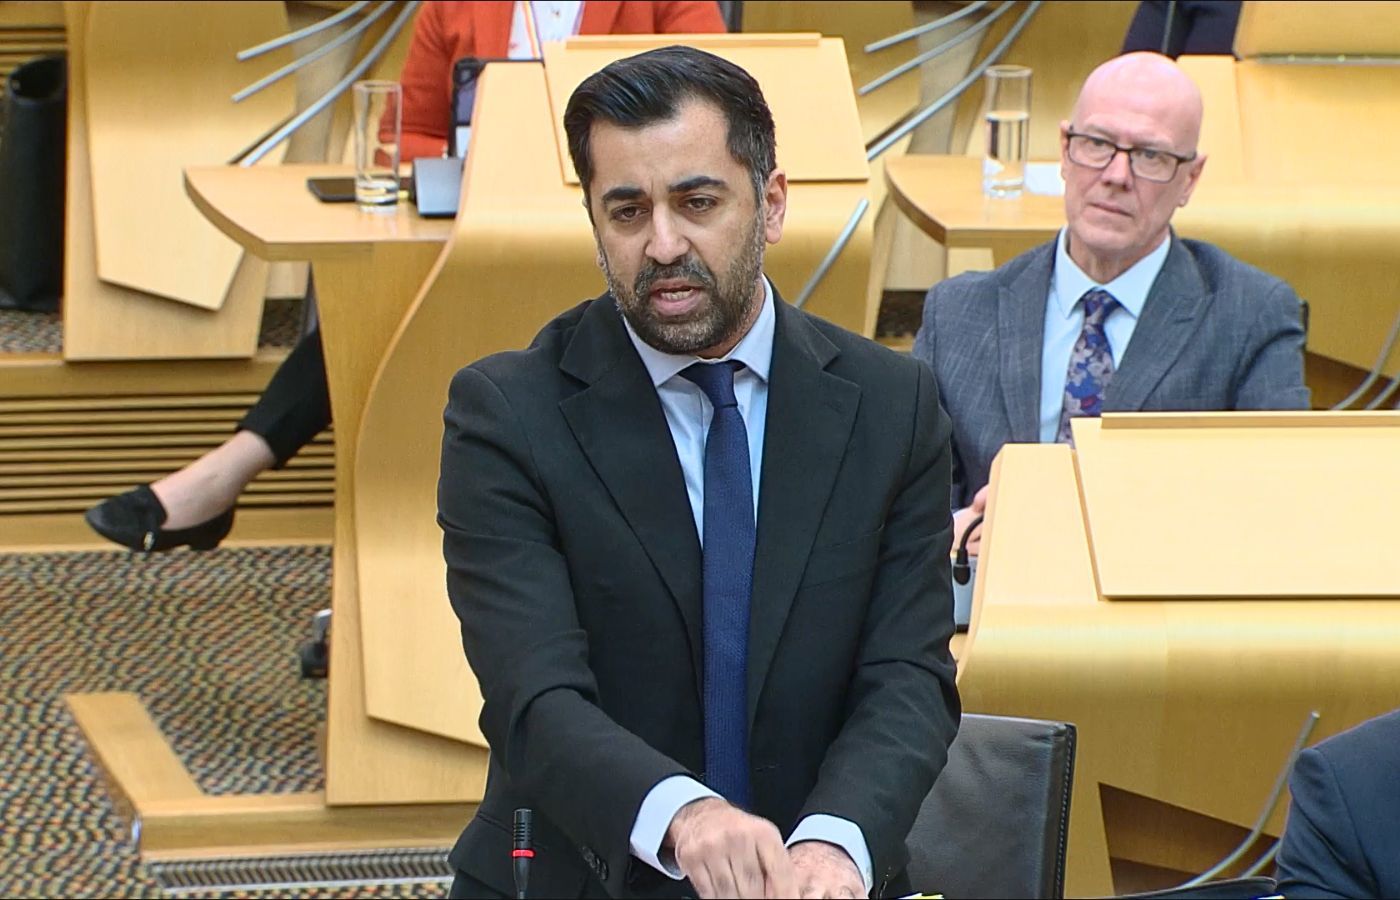 Humza Yousaf said the Scottish Government was more transparent than the UK.